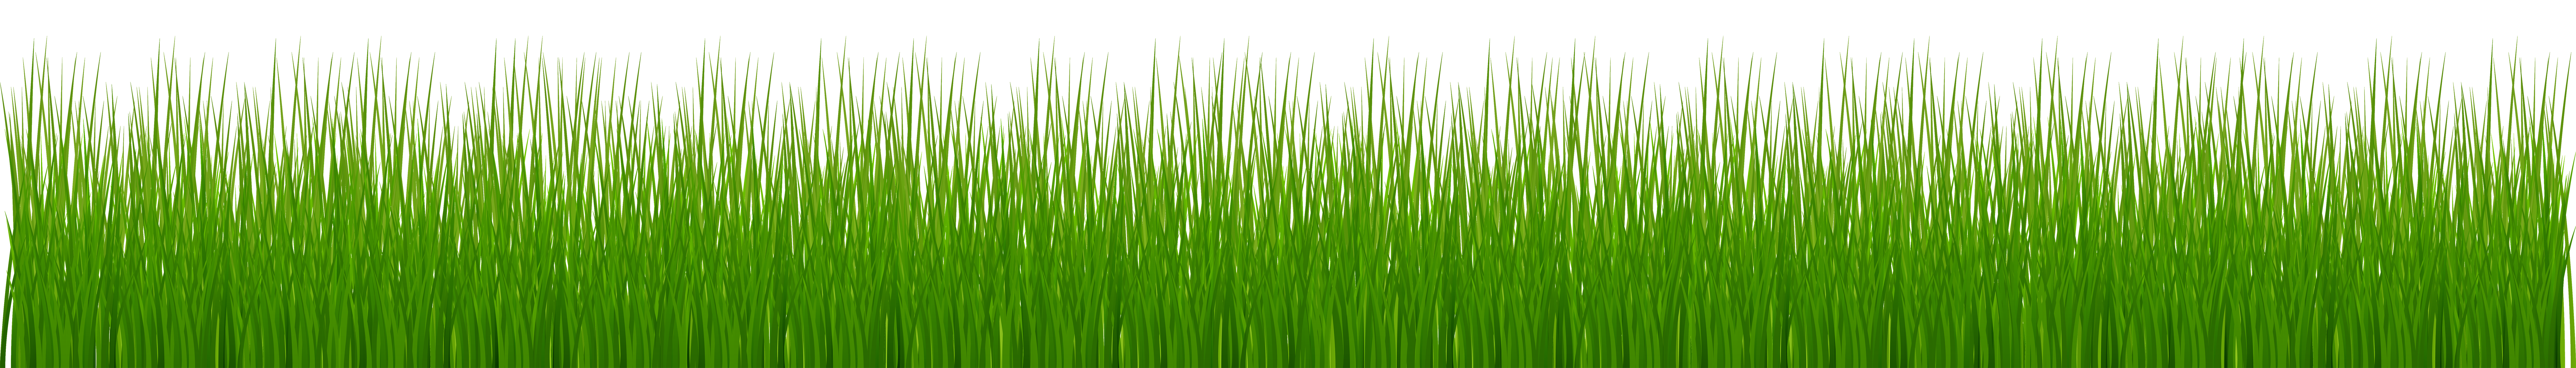 png clipart grass - photo #48